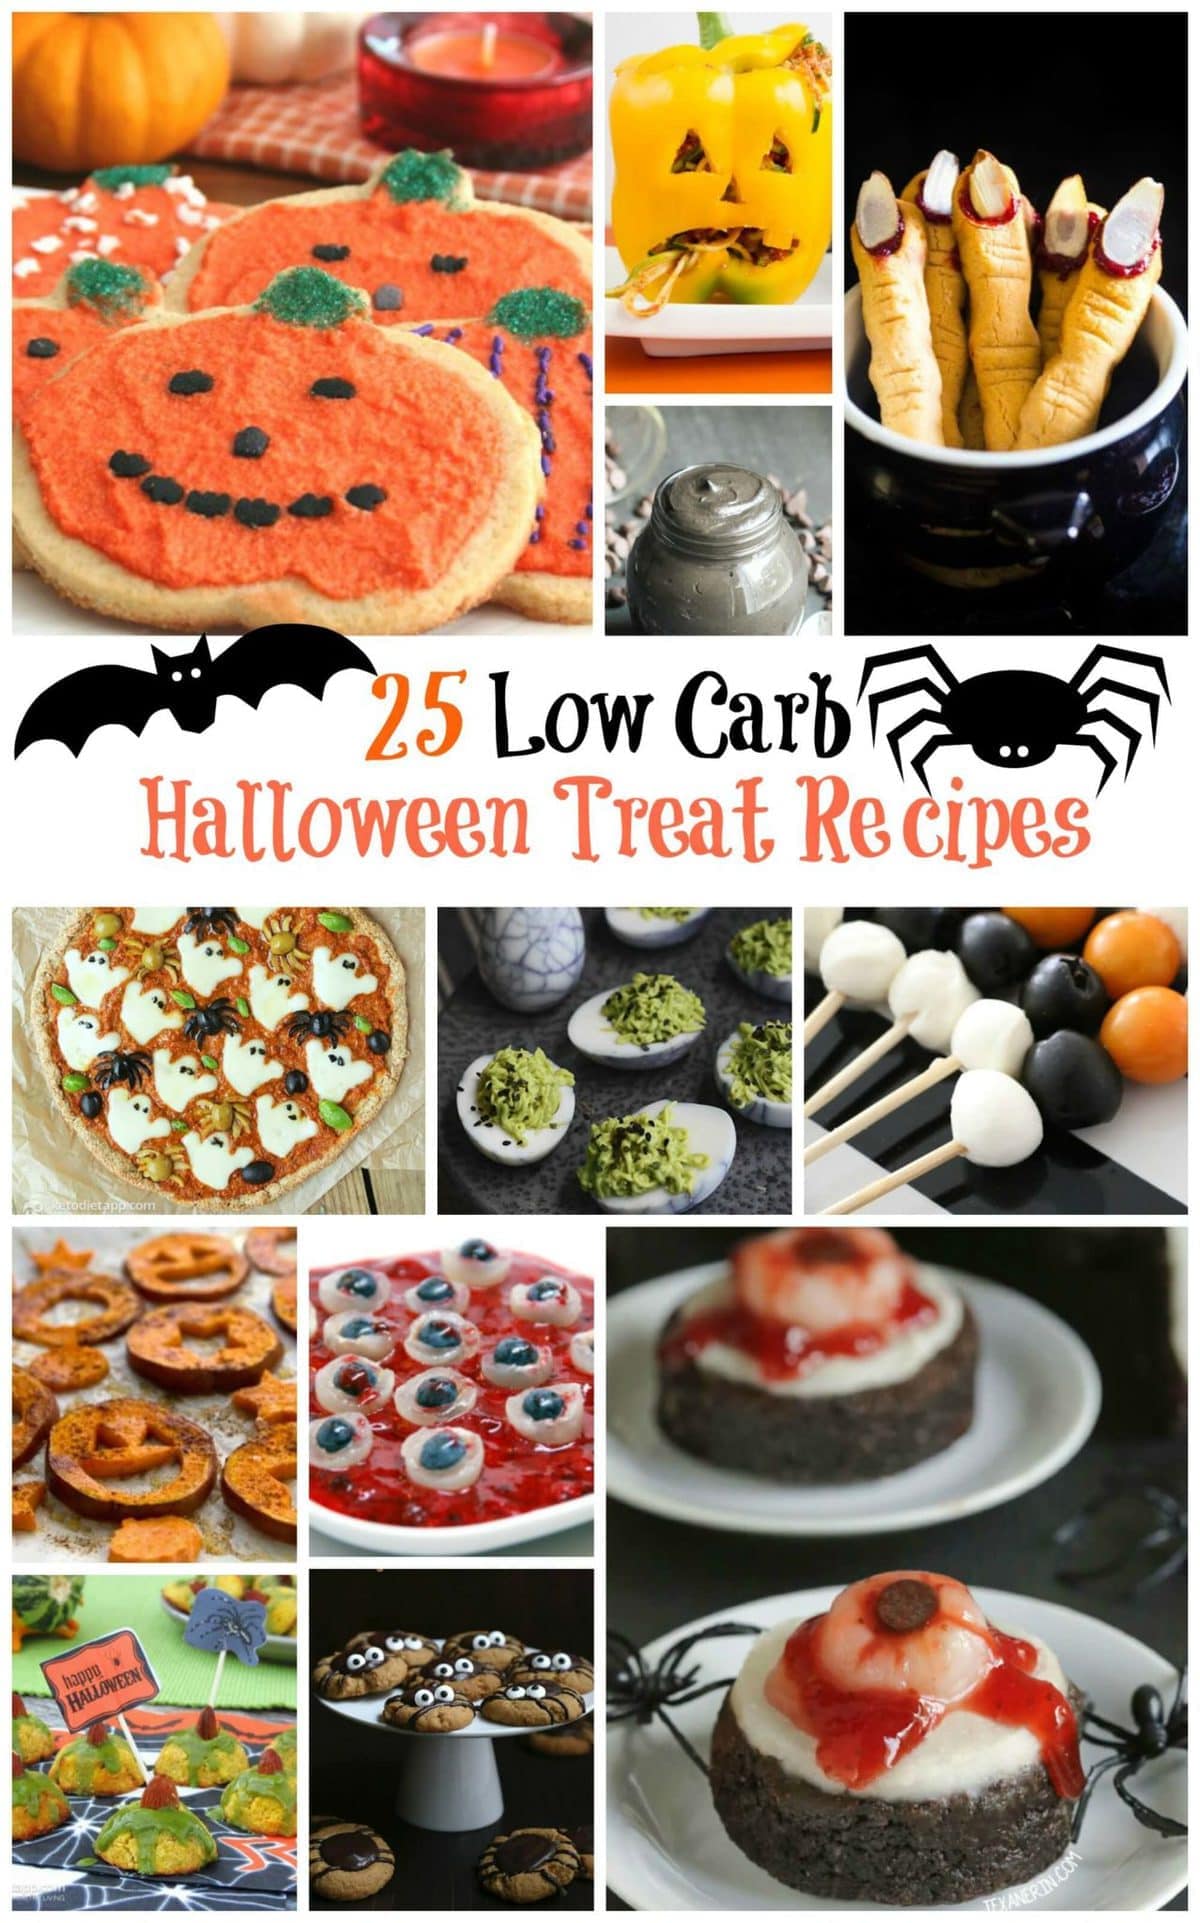 25 Low Carb Halloween Treat Recipes | Peace Love and Low Carb